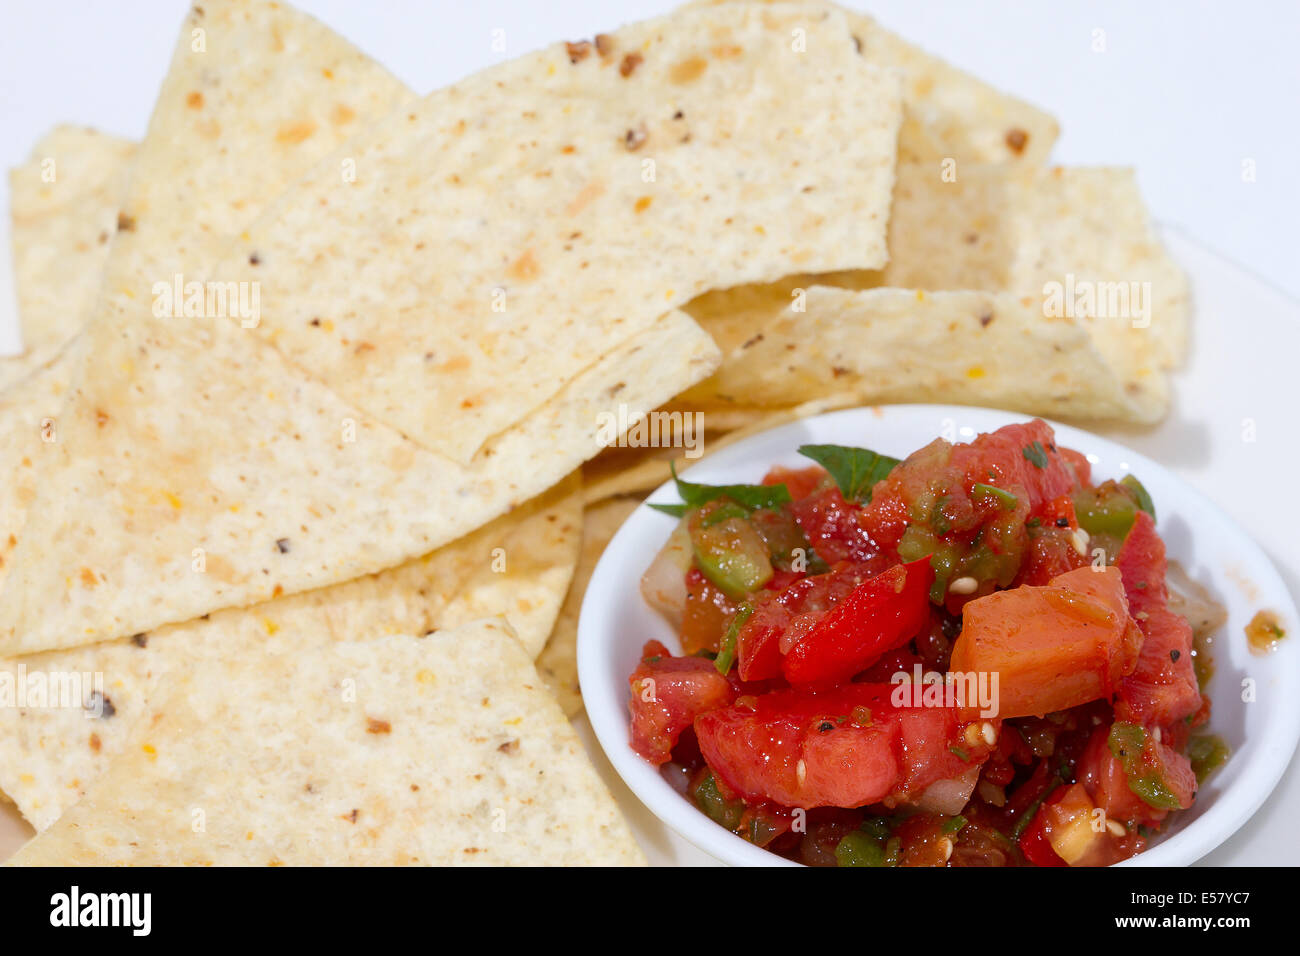 Tortilla chips and salsa in a bowl. Background is white. Stock Photo